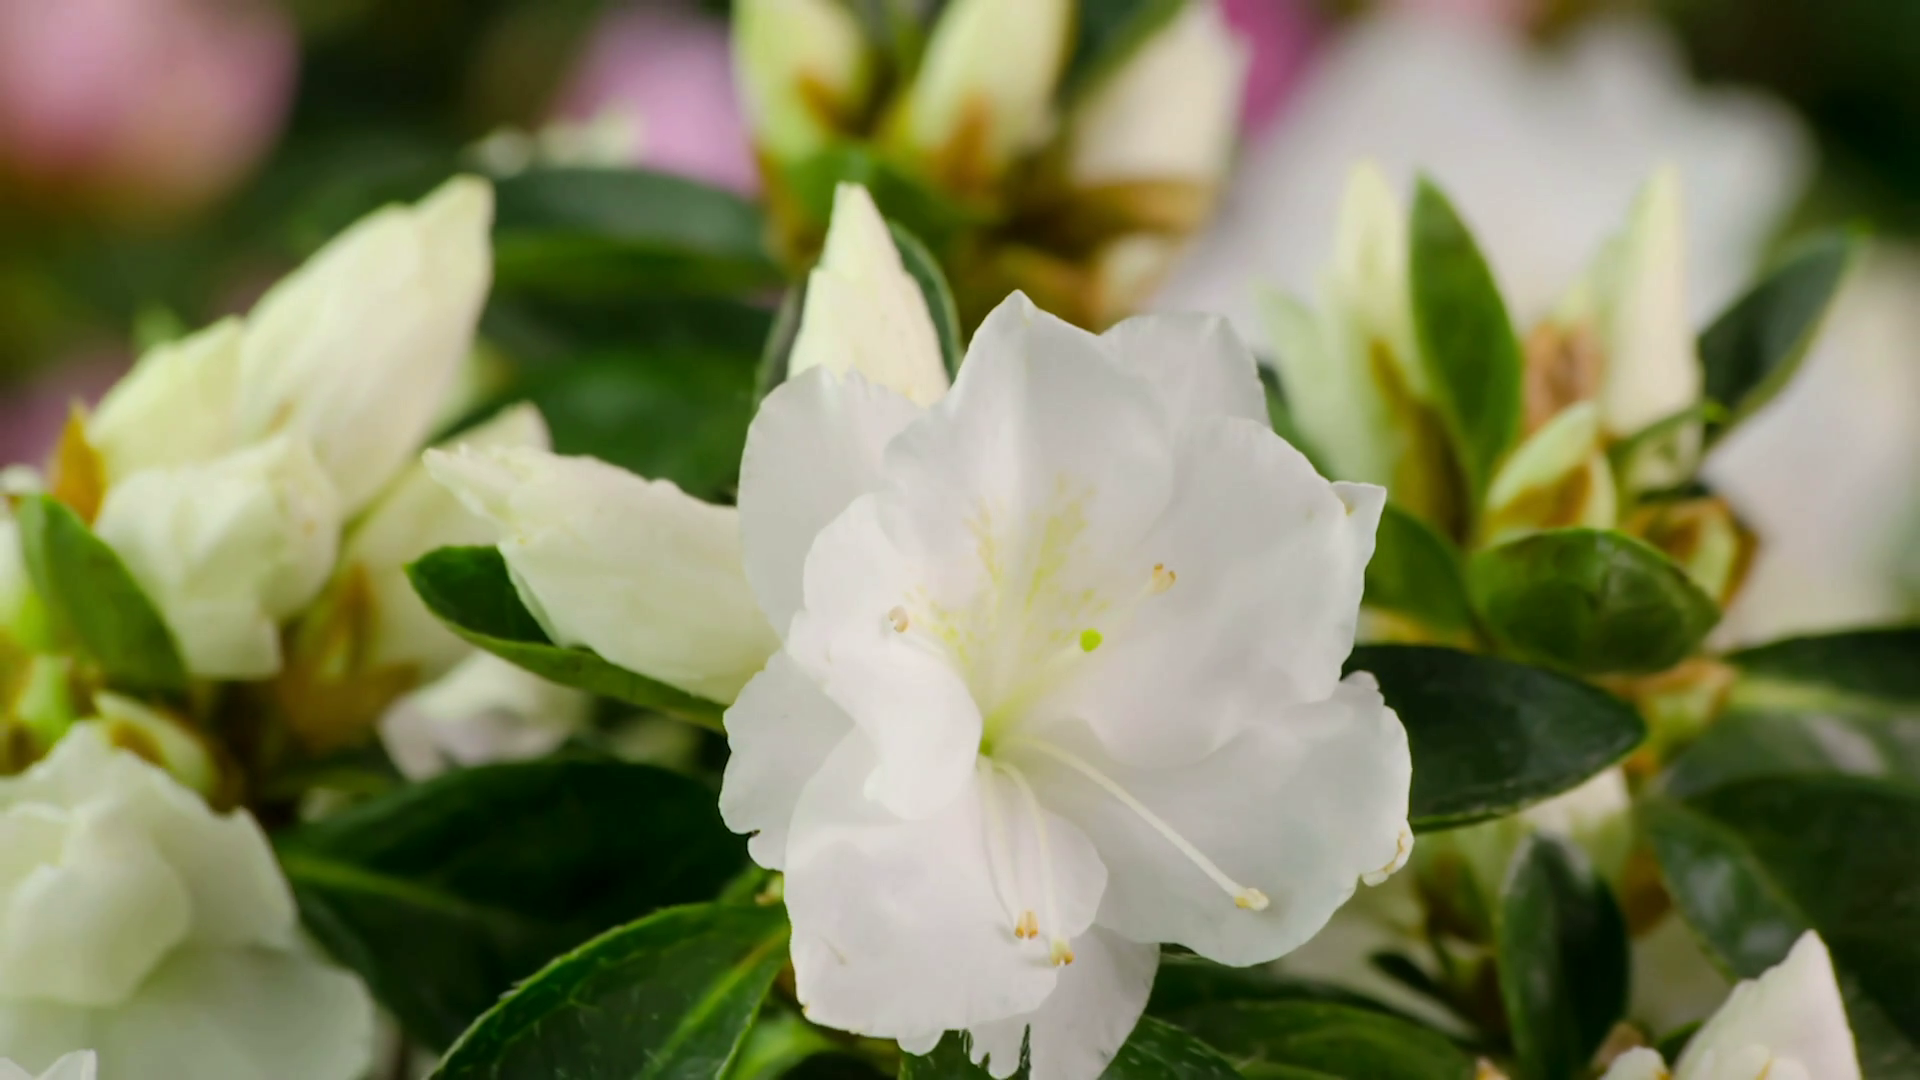 White Azalea Flower Blooming Time-Lapse Zoom Out From Buds to the ...